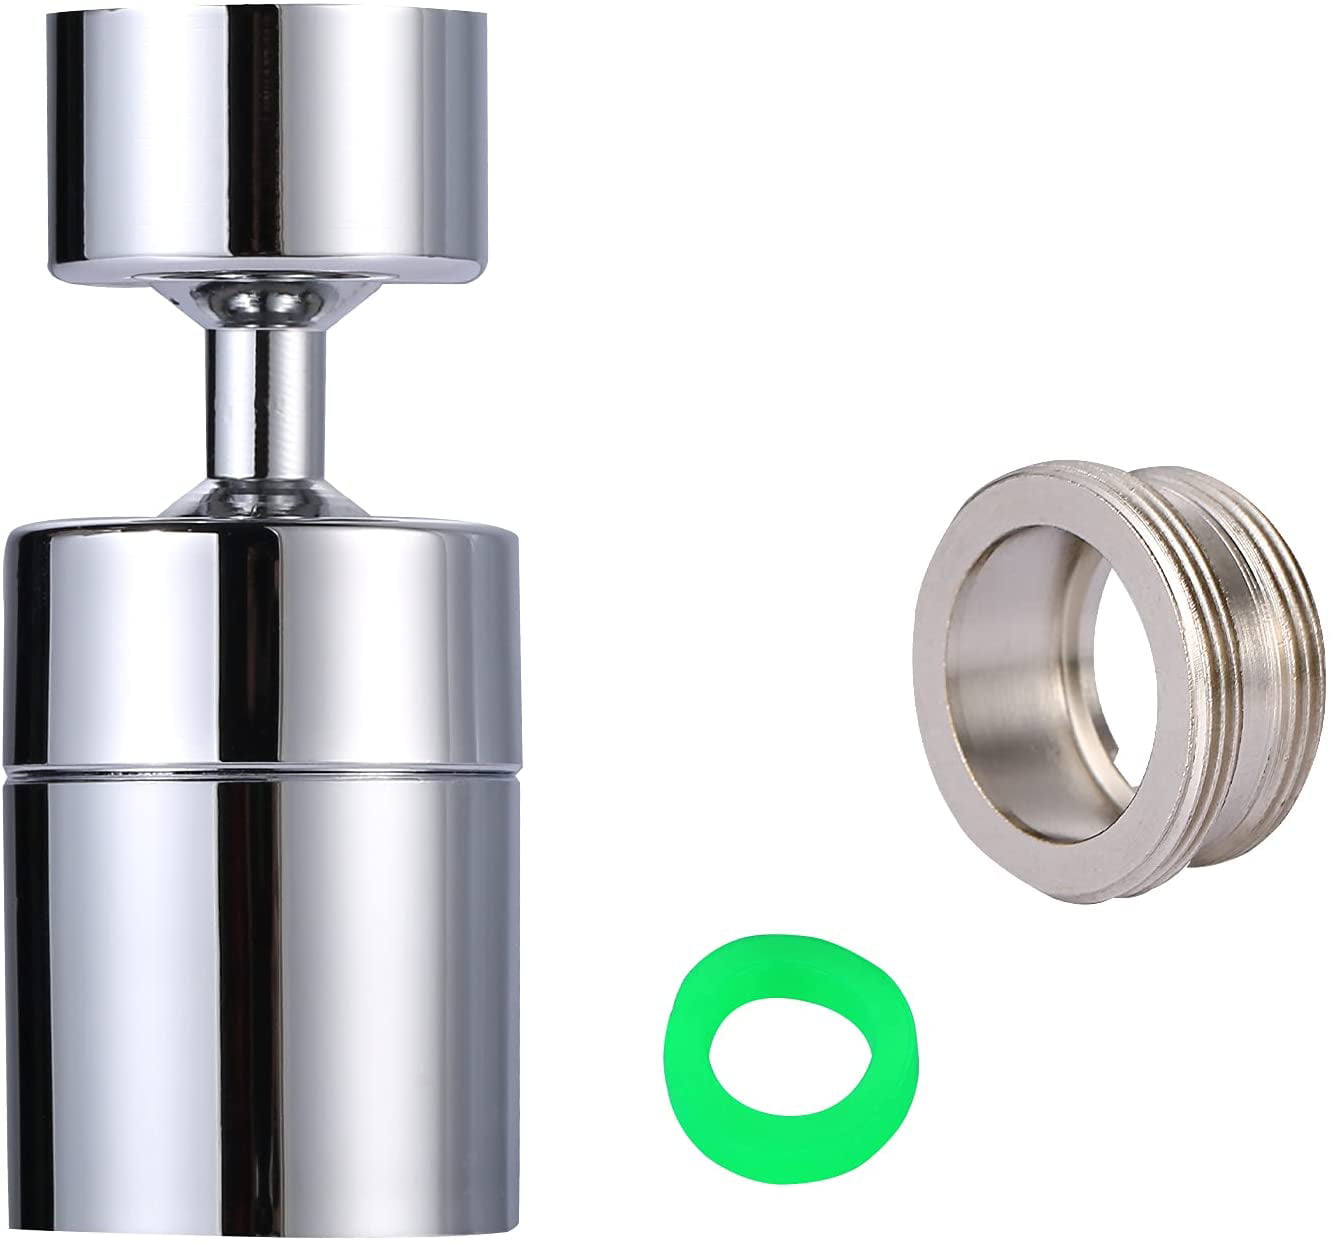 1pc 4-Sides Available Bubbler Faucet Aerator Universal Water Outlet Bubbler Disassembly Cleaning Tool